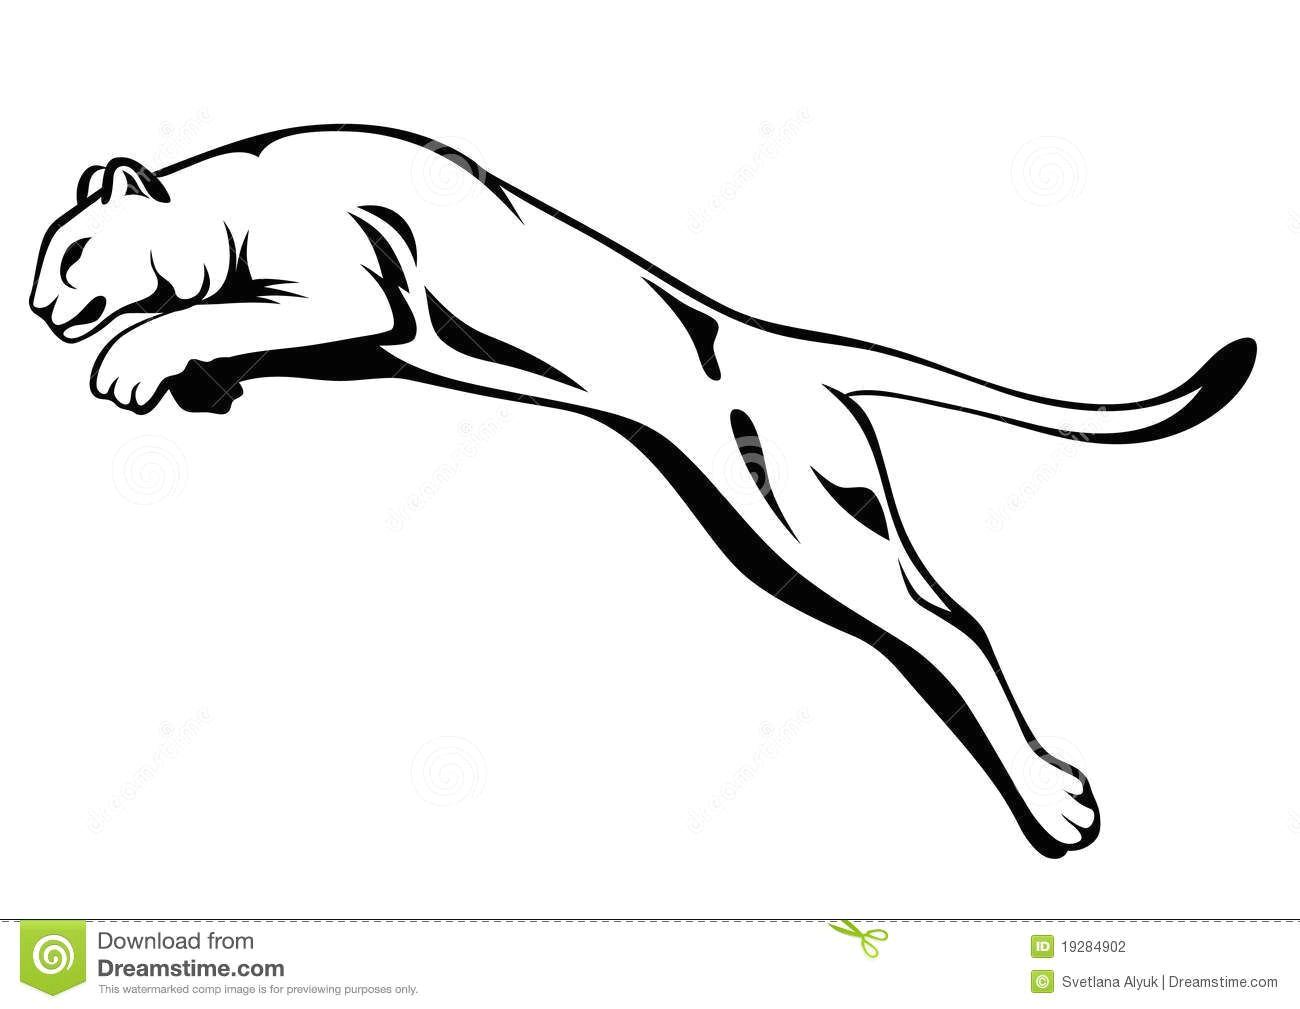 Drawing Of A Dog Jumping Mountain Lion Black and White Illustration Panther attacking